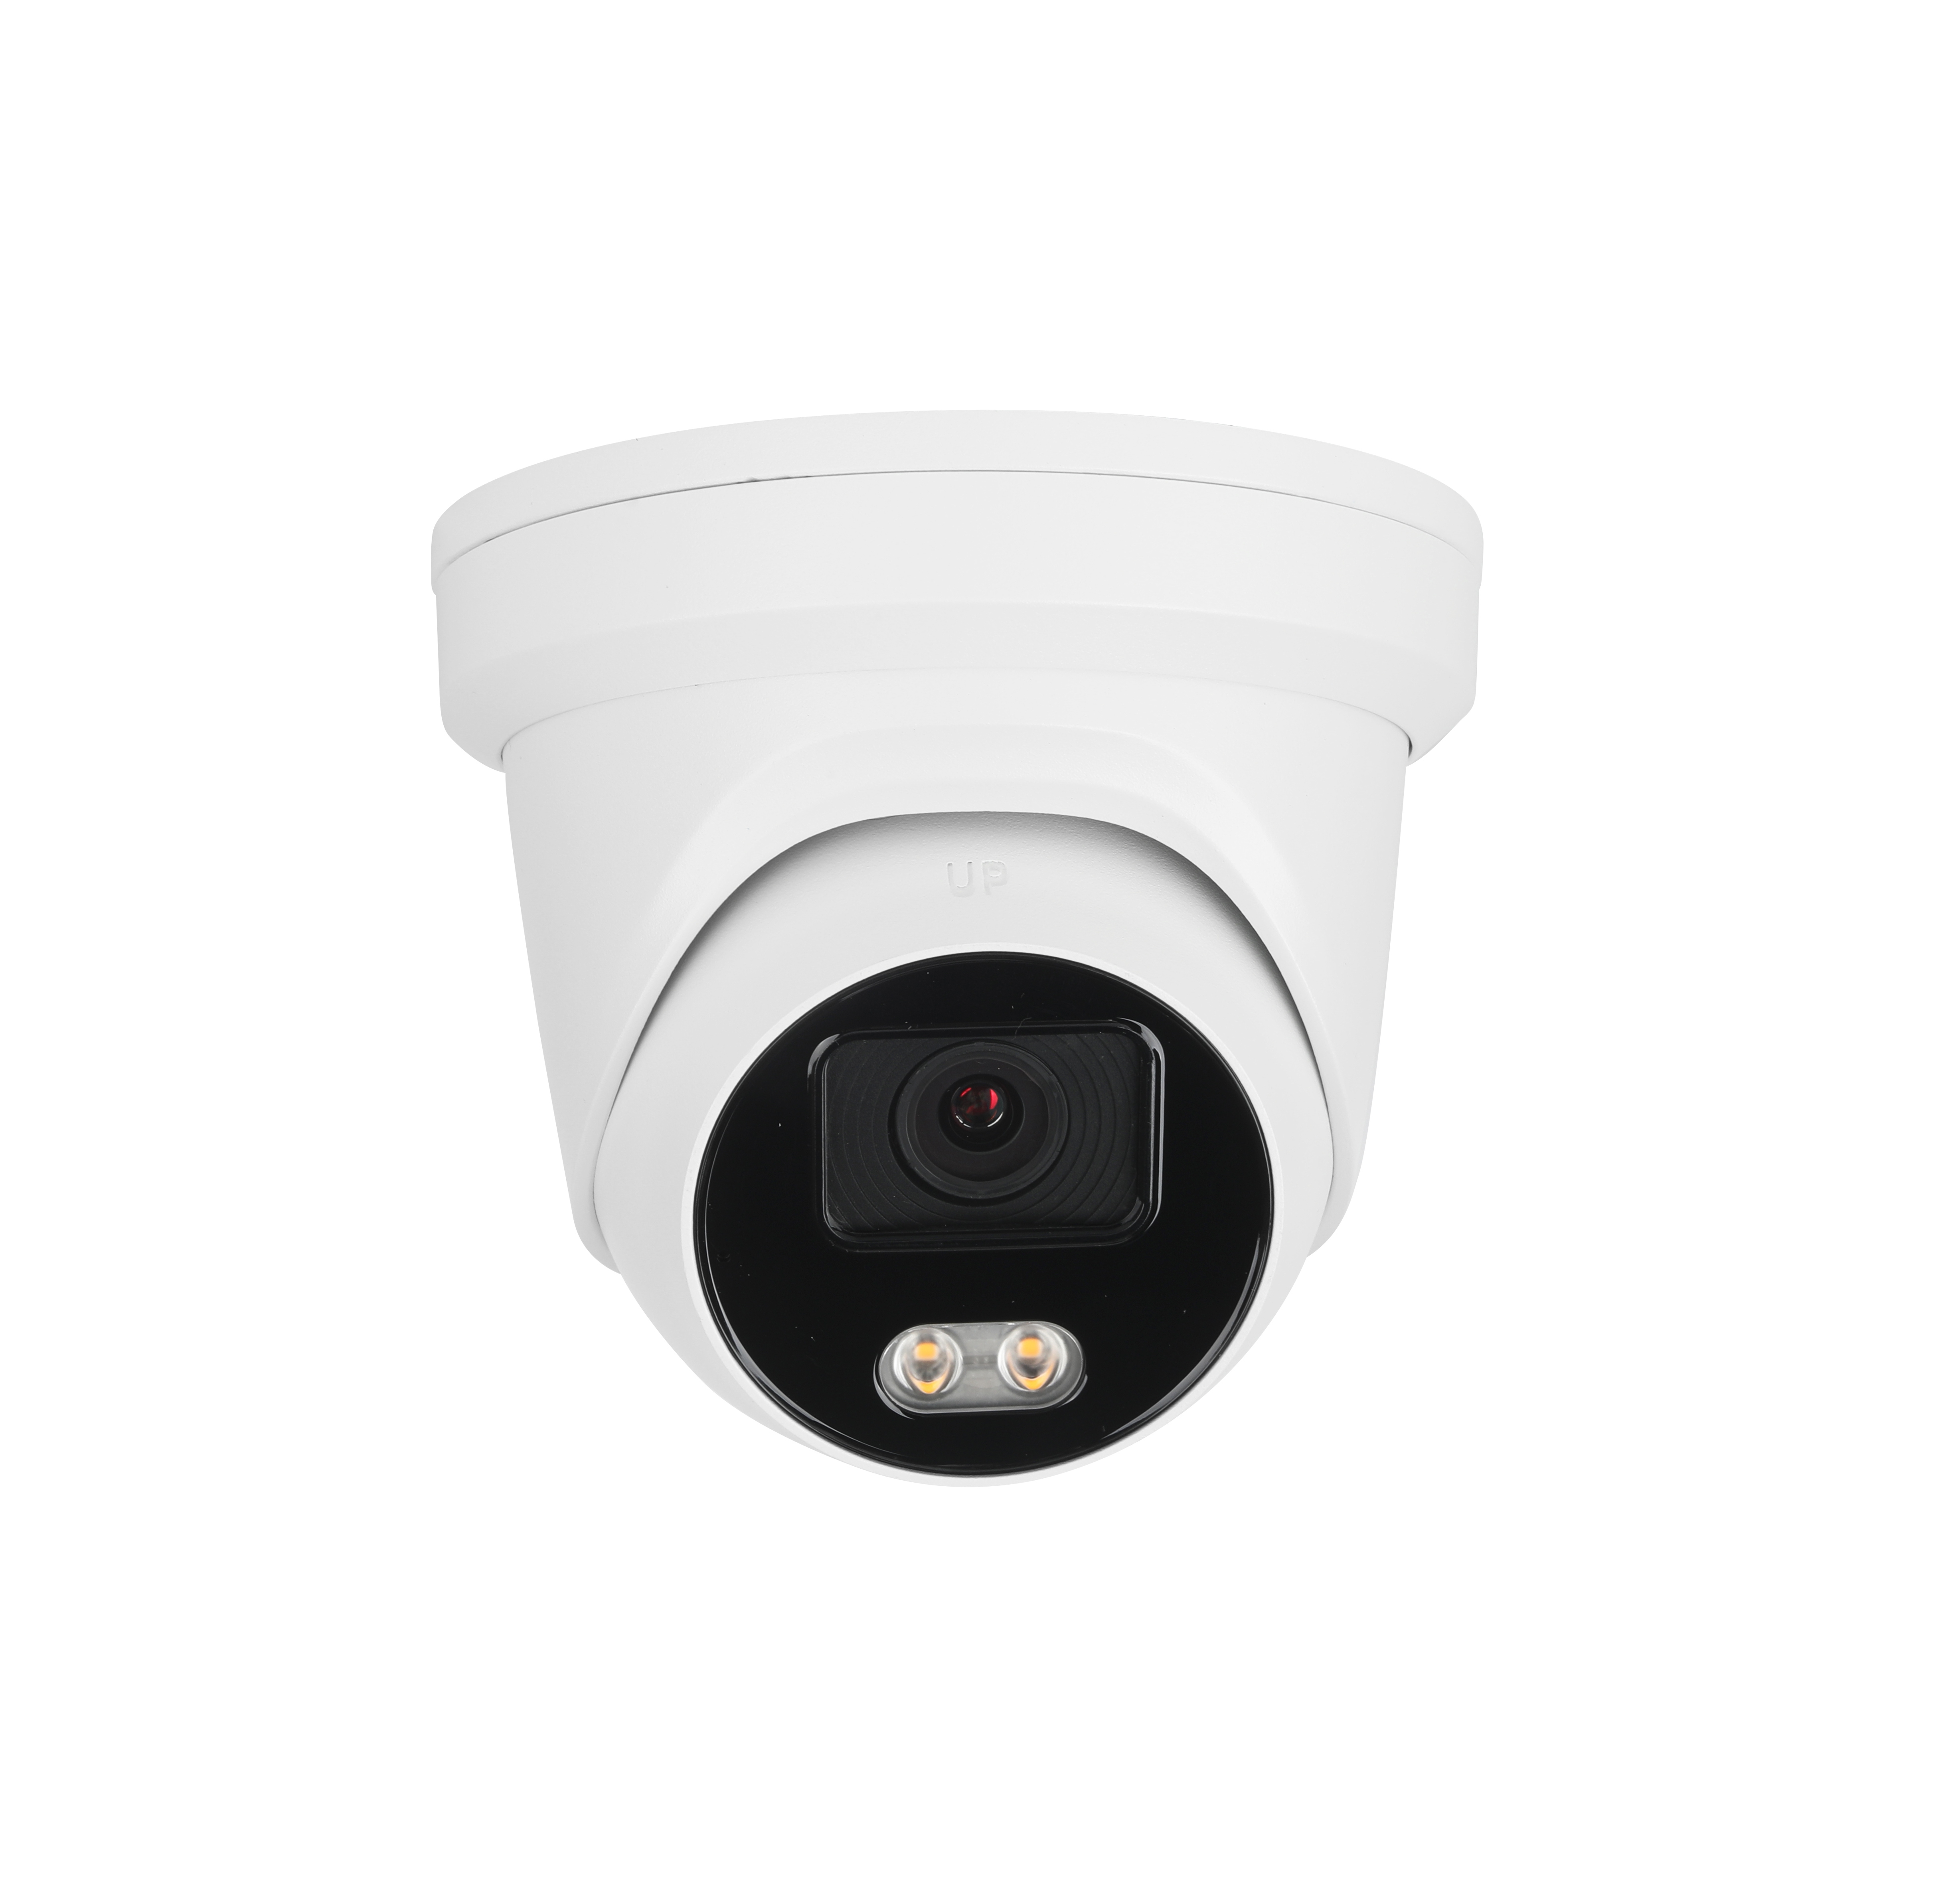 2019 Latest New 4MP IPC-T2347G-LU ColorVu Fixed Turret Network Camera Full Time Color,Free DHL shipping